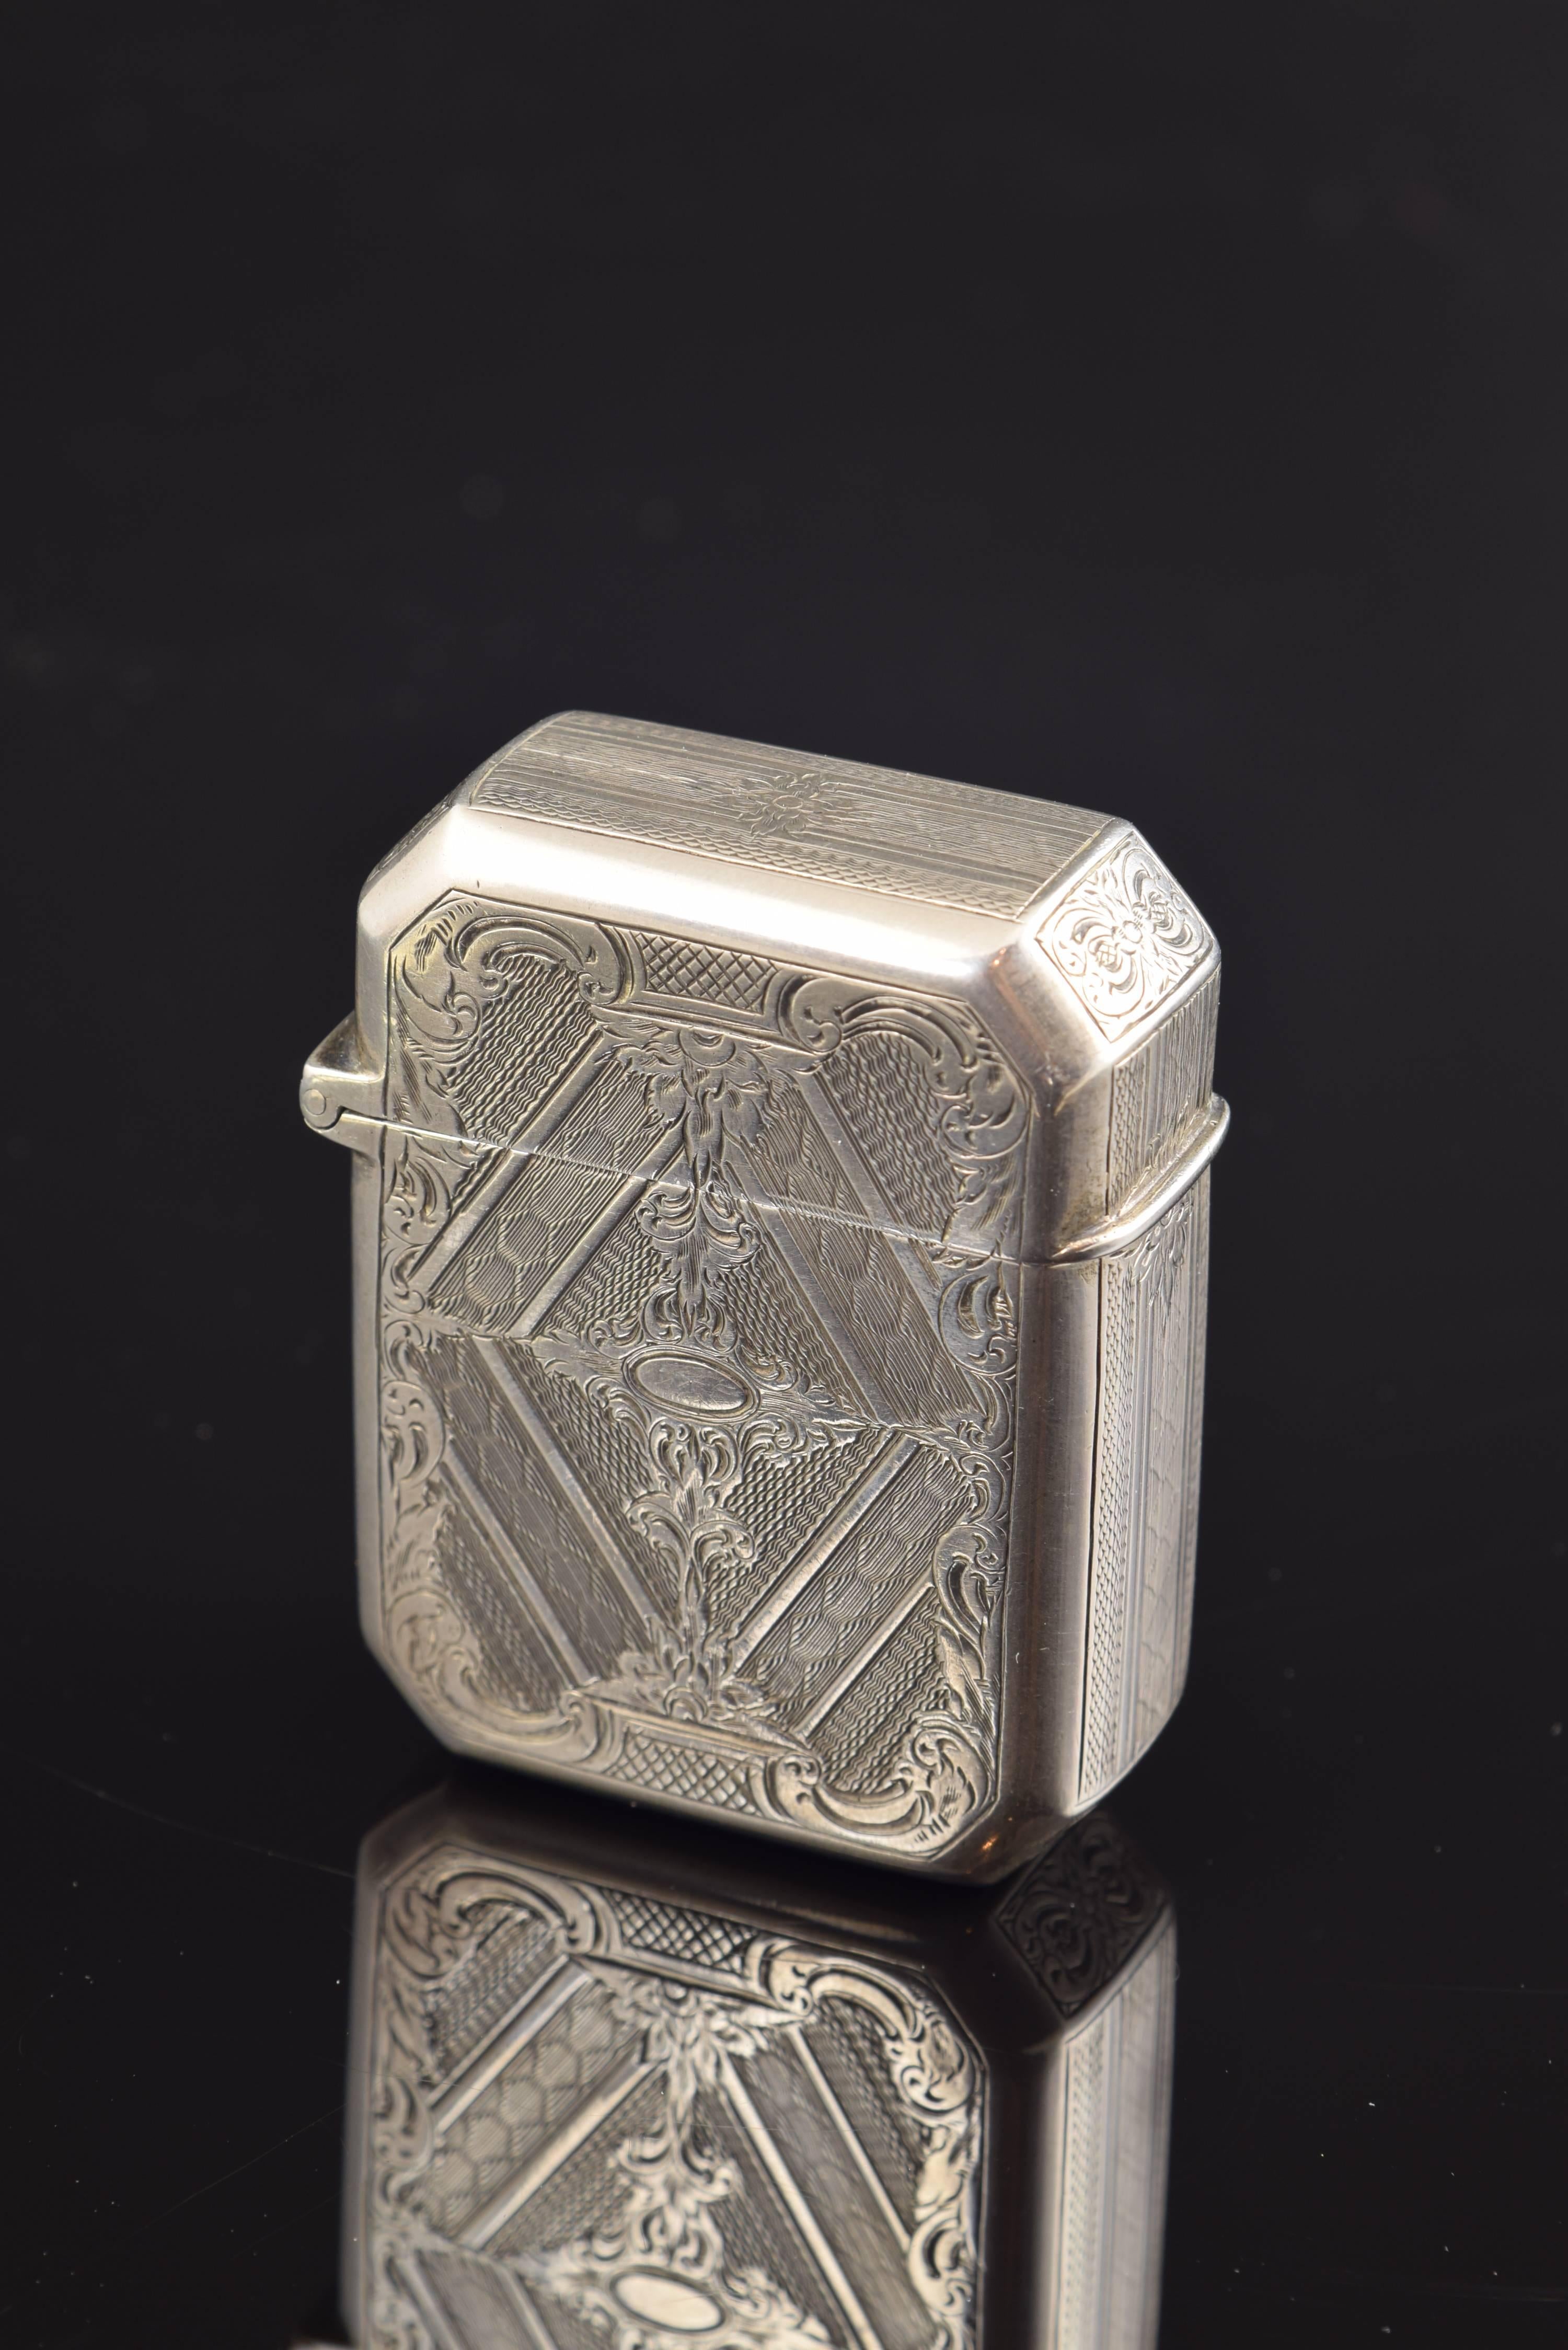 
Rectangular silver box with the lid on one of the smaller sides, gilt interior and exterior decorated with a very delicate composition of leaves, geometrical elements, etc., showing a strong influence from neoclassical style silver.
Weight: 92